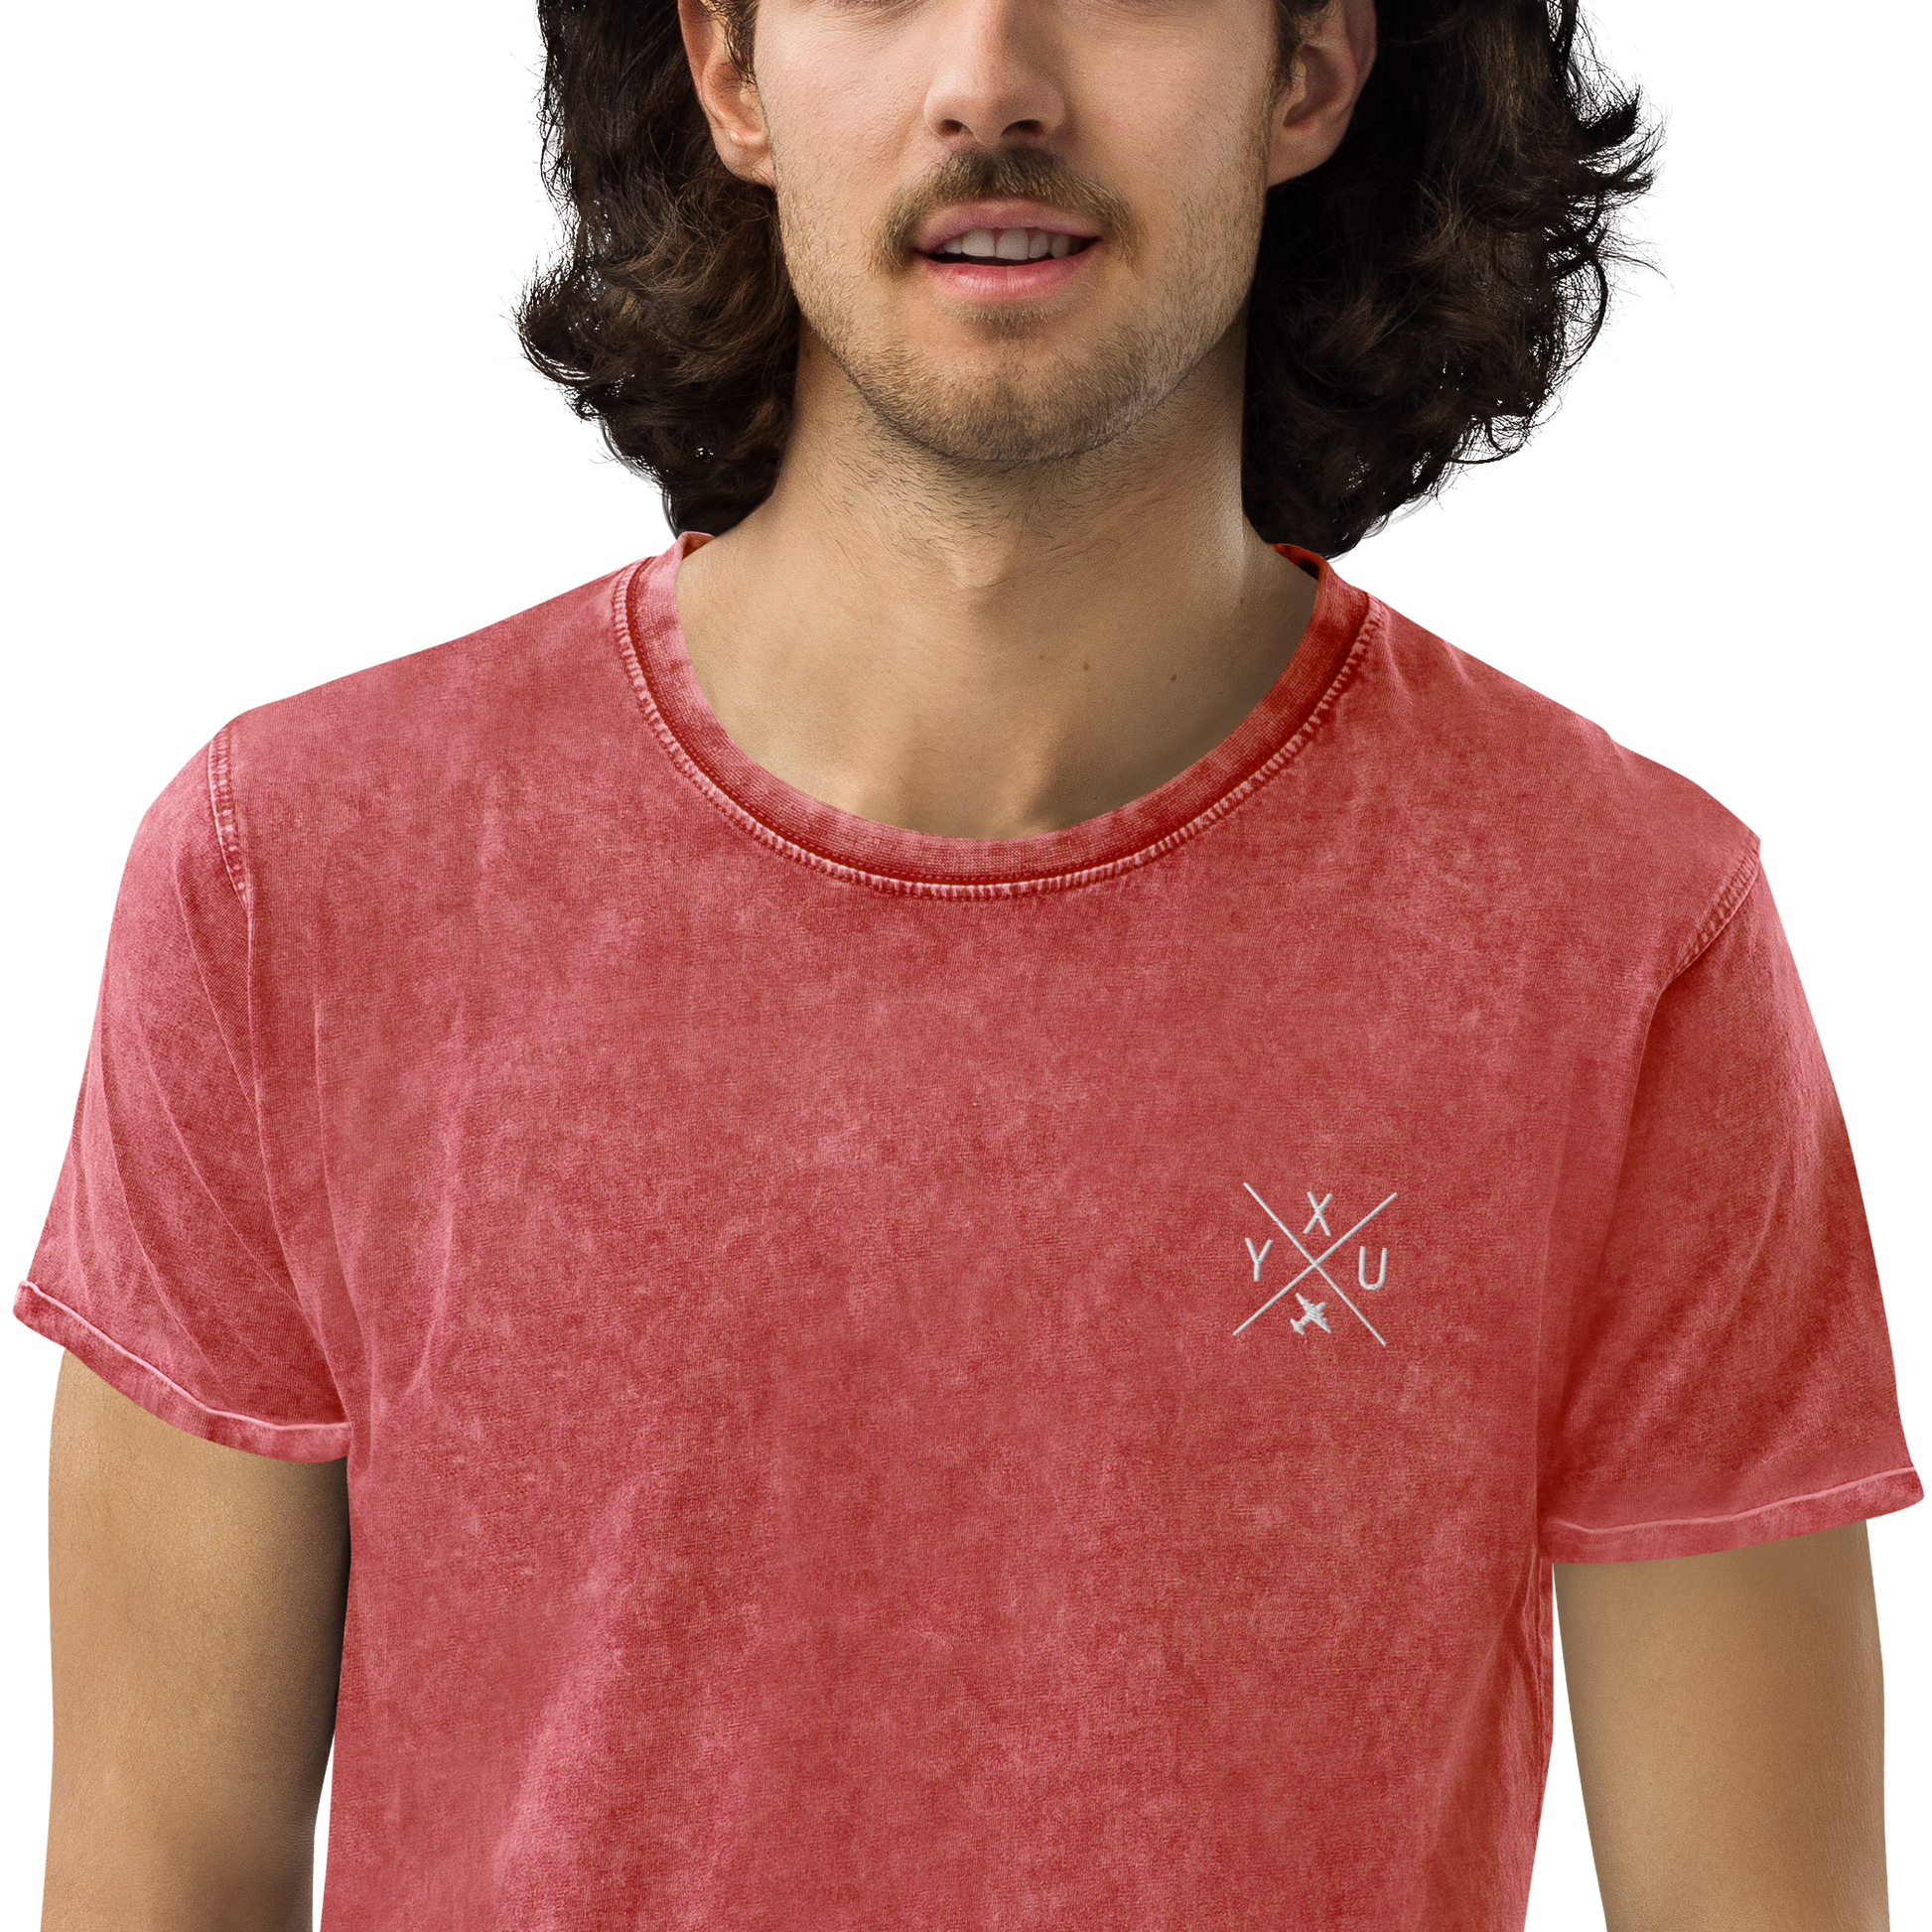 YHM Designs - YXU London Denim T-Shirt - Crossed-X Design with Airport Code and Vintage Propliner - White Embroidery - Image 09